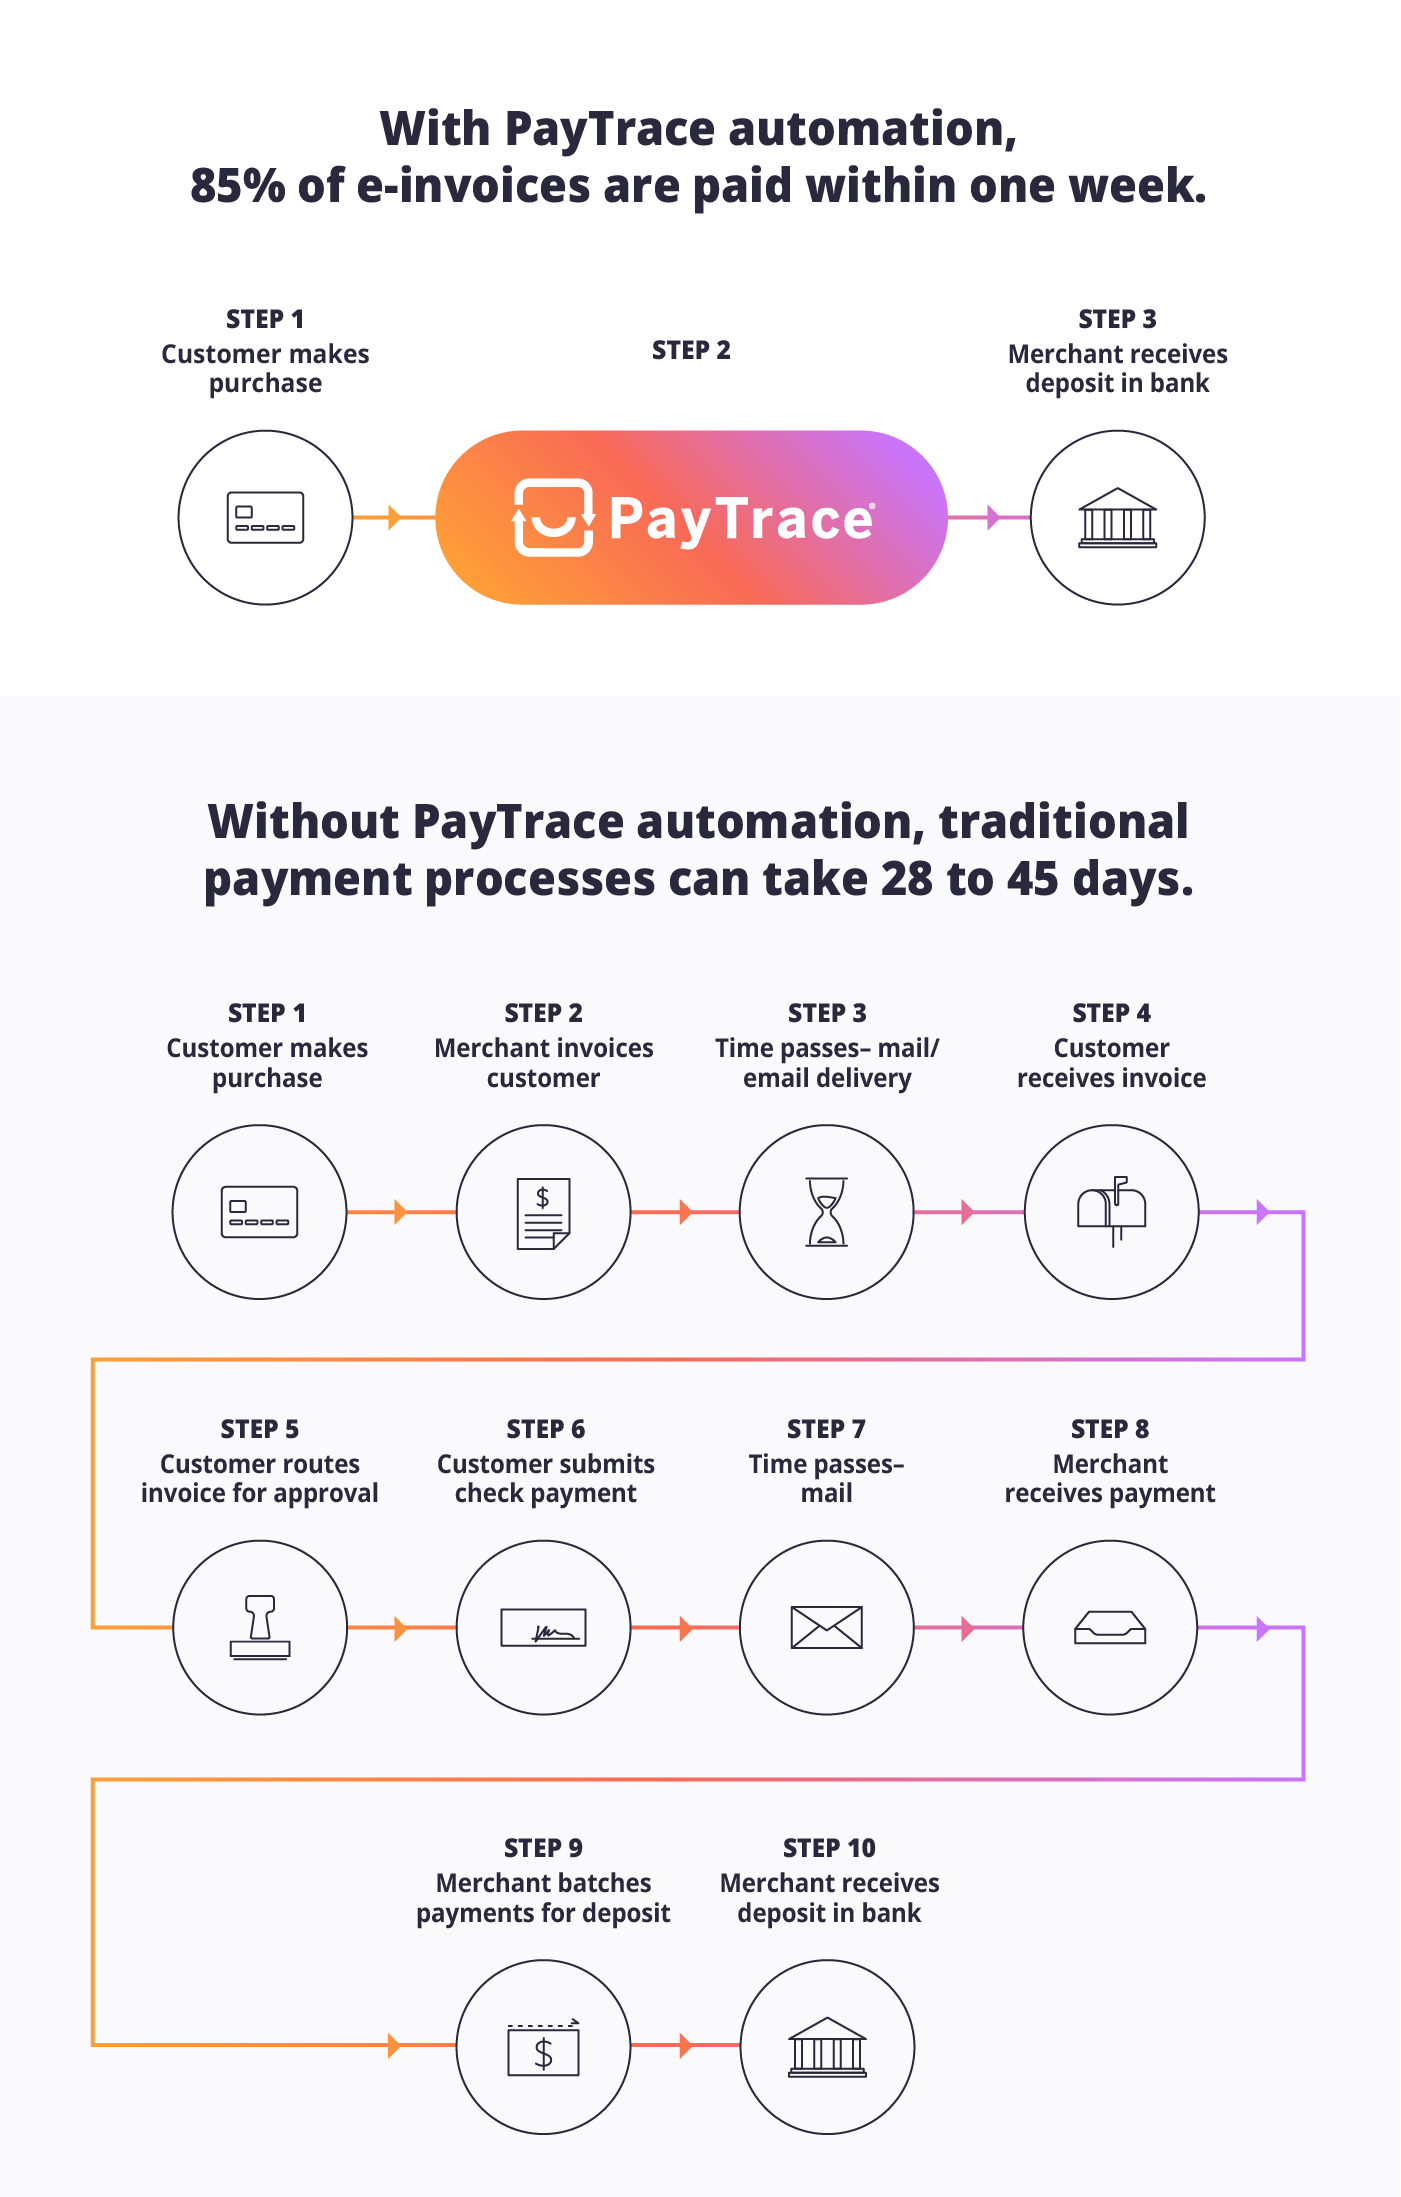 The image displays two flowcharts describing the accounts receivable process with and without PayTrace automation. The top section, highlighted in orange and titled 'With PayTrace automation,' states that '85% of e-invoices are paid within one week' and illustrates a three-step process: 'Customer makes purchase,' followed by the PayTrace automation icon, and ending with 'Merchant receives deposit in bank.' The bottom section, outlined in purple and titled 'Without PayTrace automation,' indicates that 'traditional payment processes can take 28 to 45 days.' It details a ten-step process beginning with 'Customer makes purchase,' followed by steps for invoicing, time for mail/email delivery, invoice receipt, routing for approval, check payment by the customer, time for mail, merchant receiving payment, batching payments for deposit, and ending with 'Merchant receives deposit in bank.' Icons represent each step, emphasizing the increased efficiency and speed when using PayTrace automation.